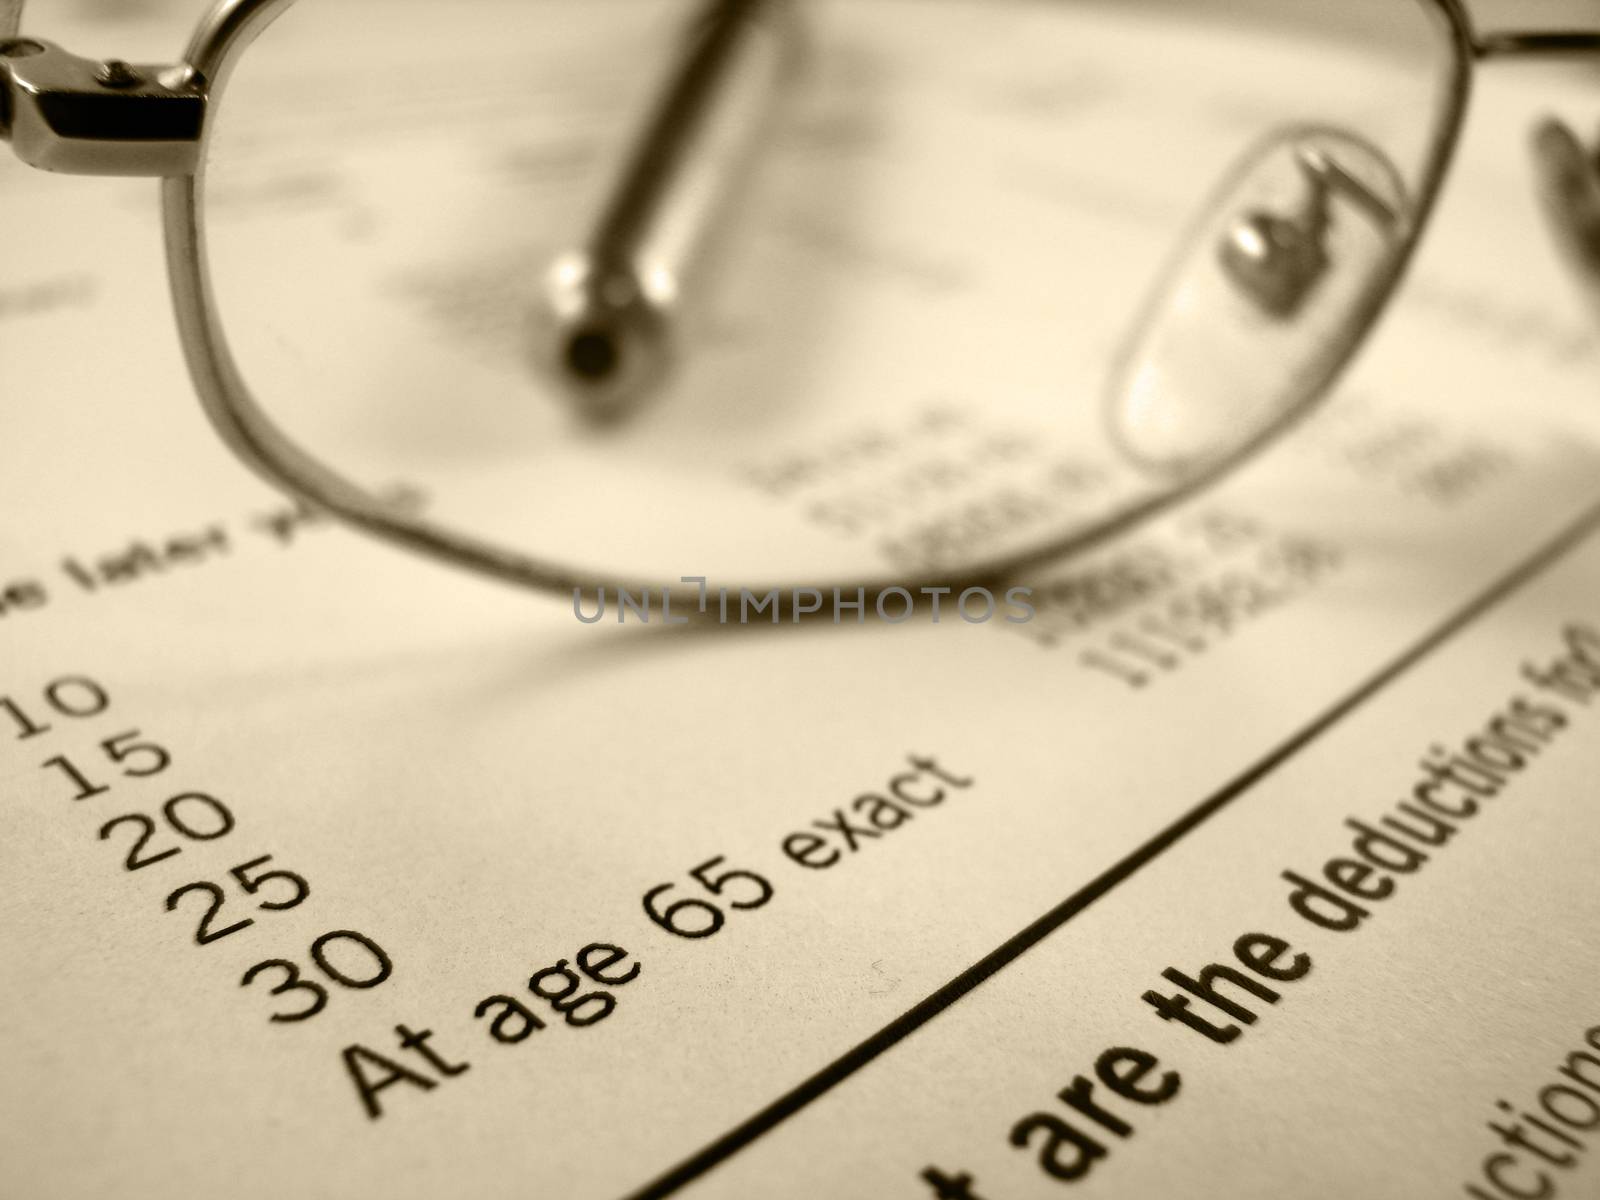 Retirement image of pension plan form with glasses and pen